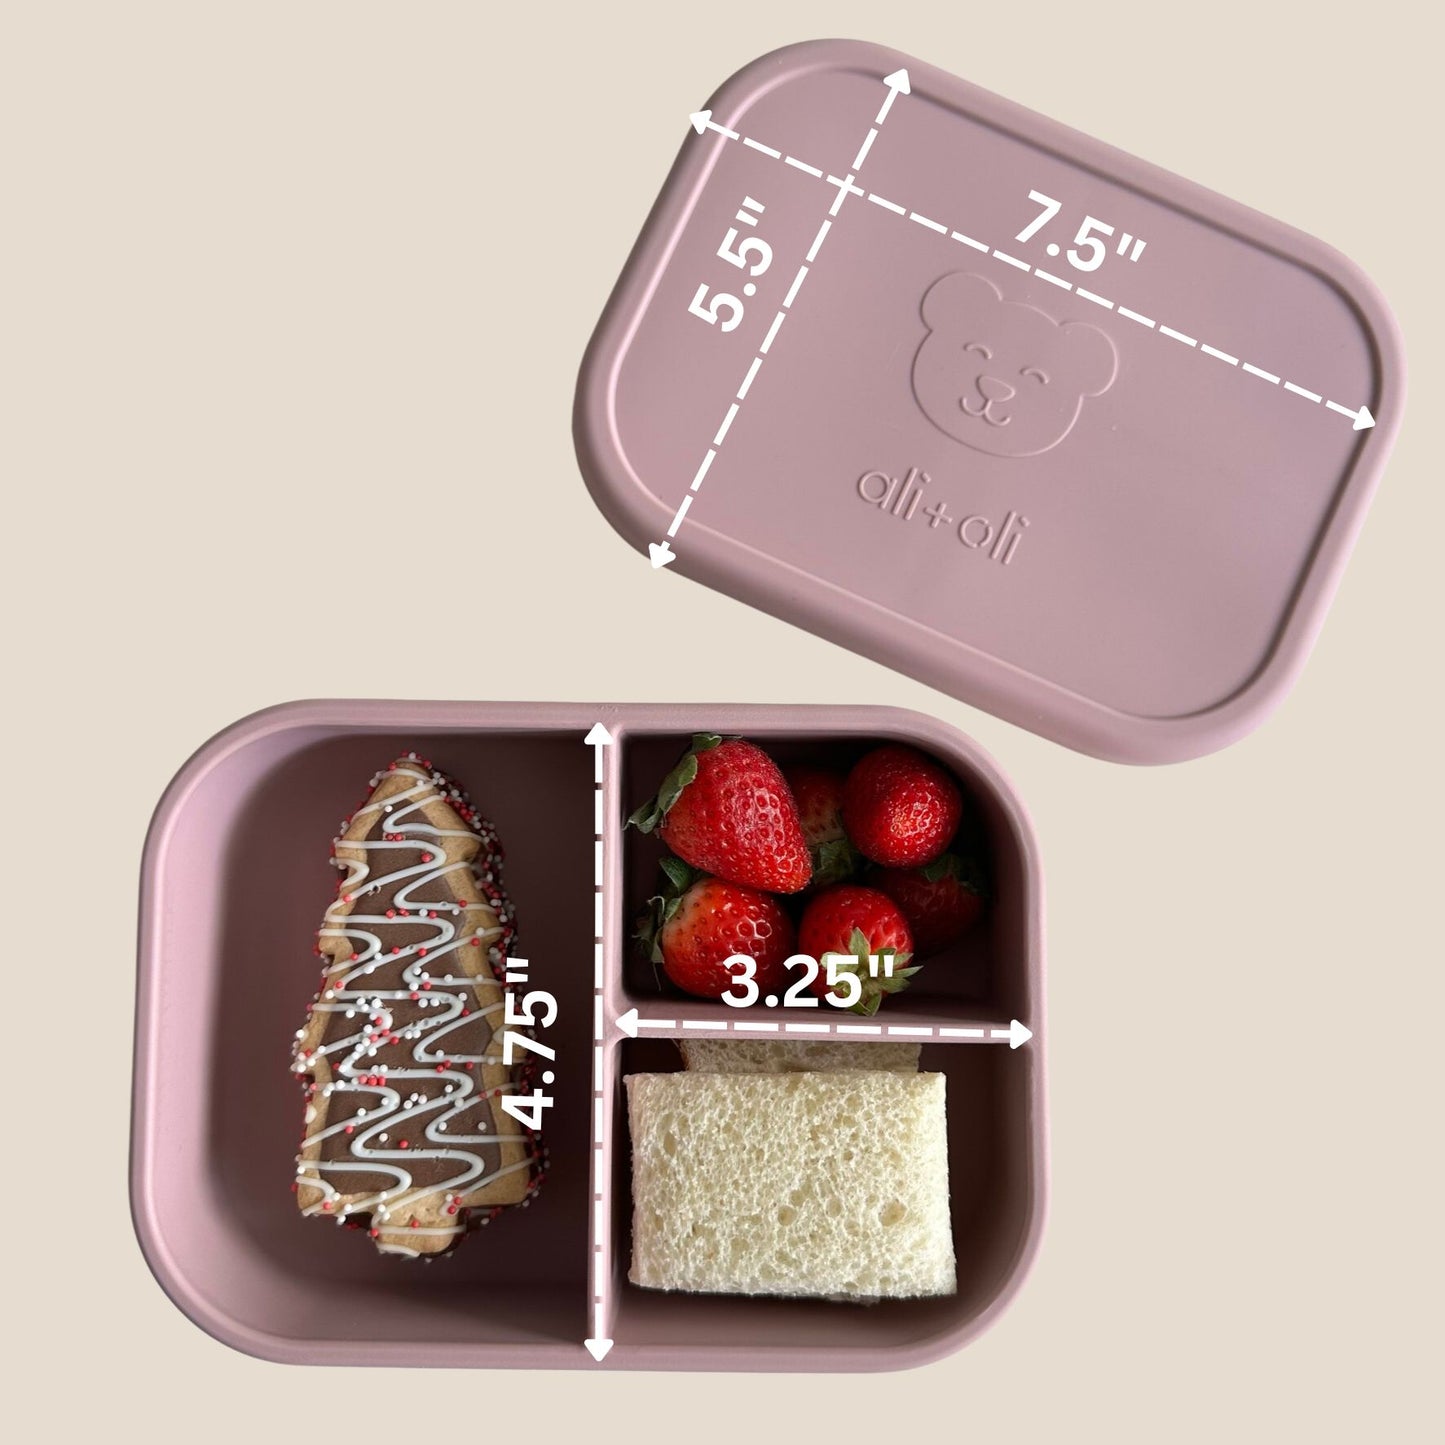 Ali+Oli Reusable Silicone Bento Box - 3 Compartments - Leakproof (Rose)